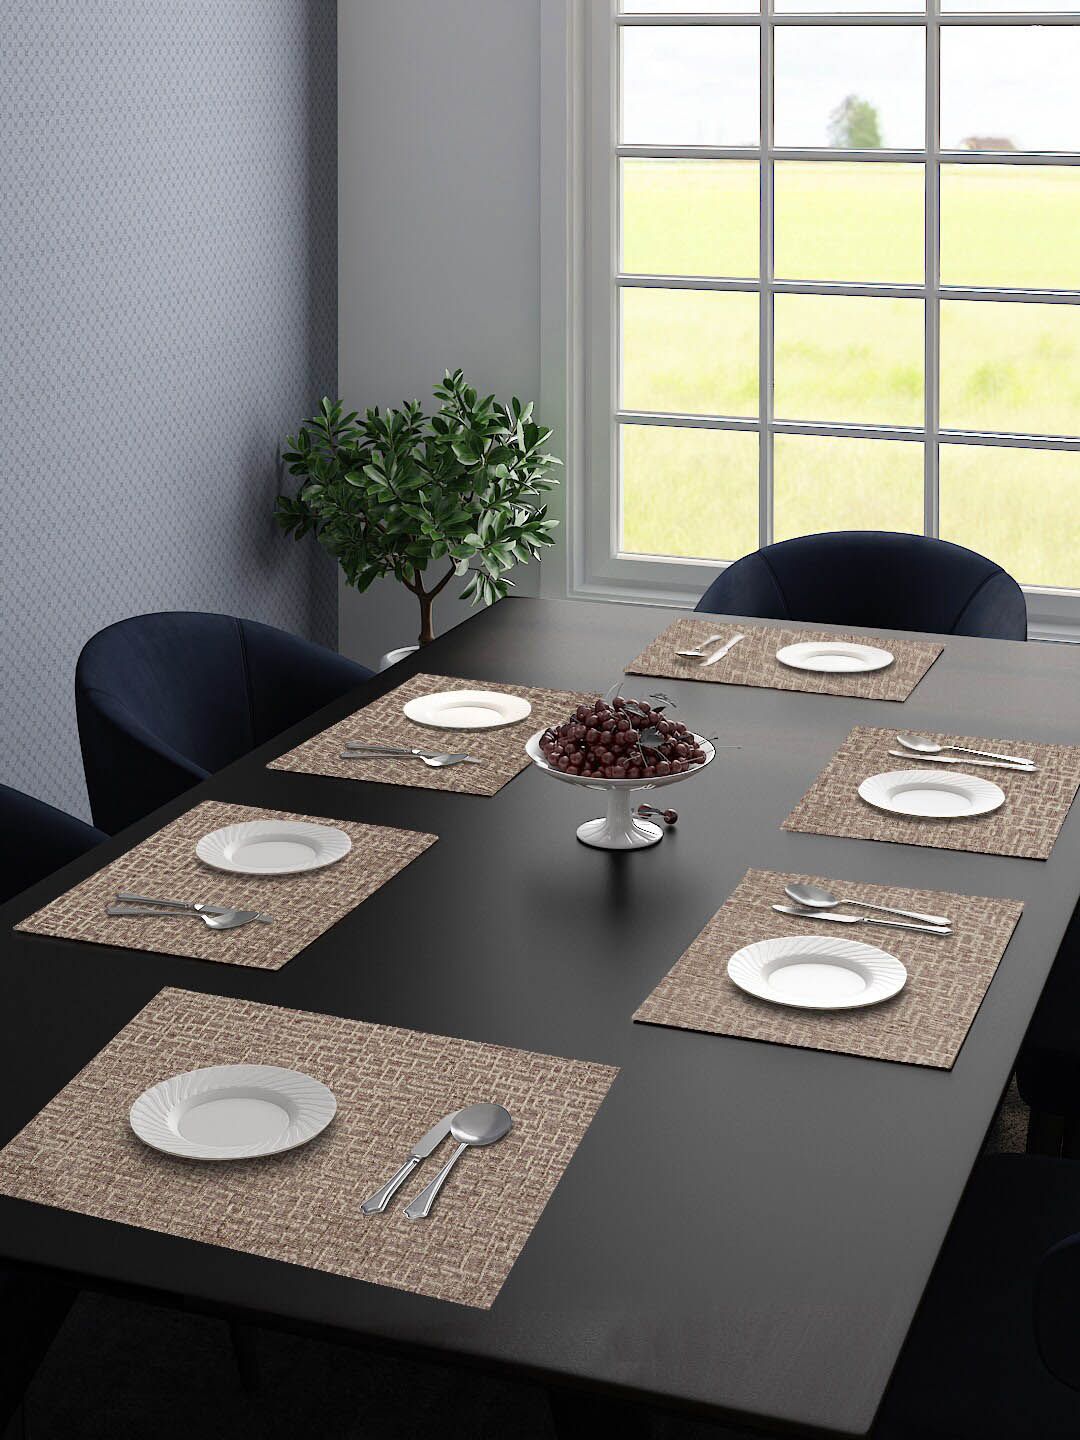 Saral Home Set Of 6 Beige Printed Rectangular Table Placemats Price in India